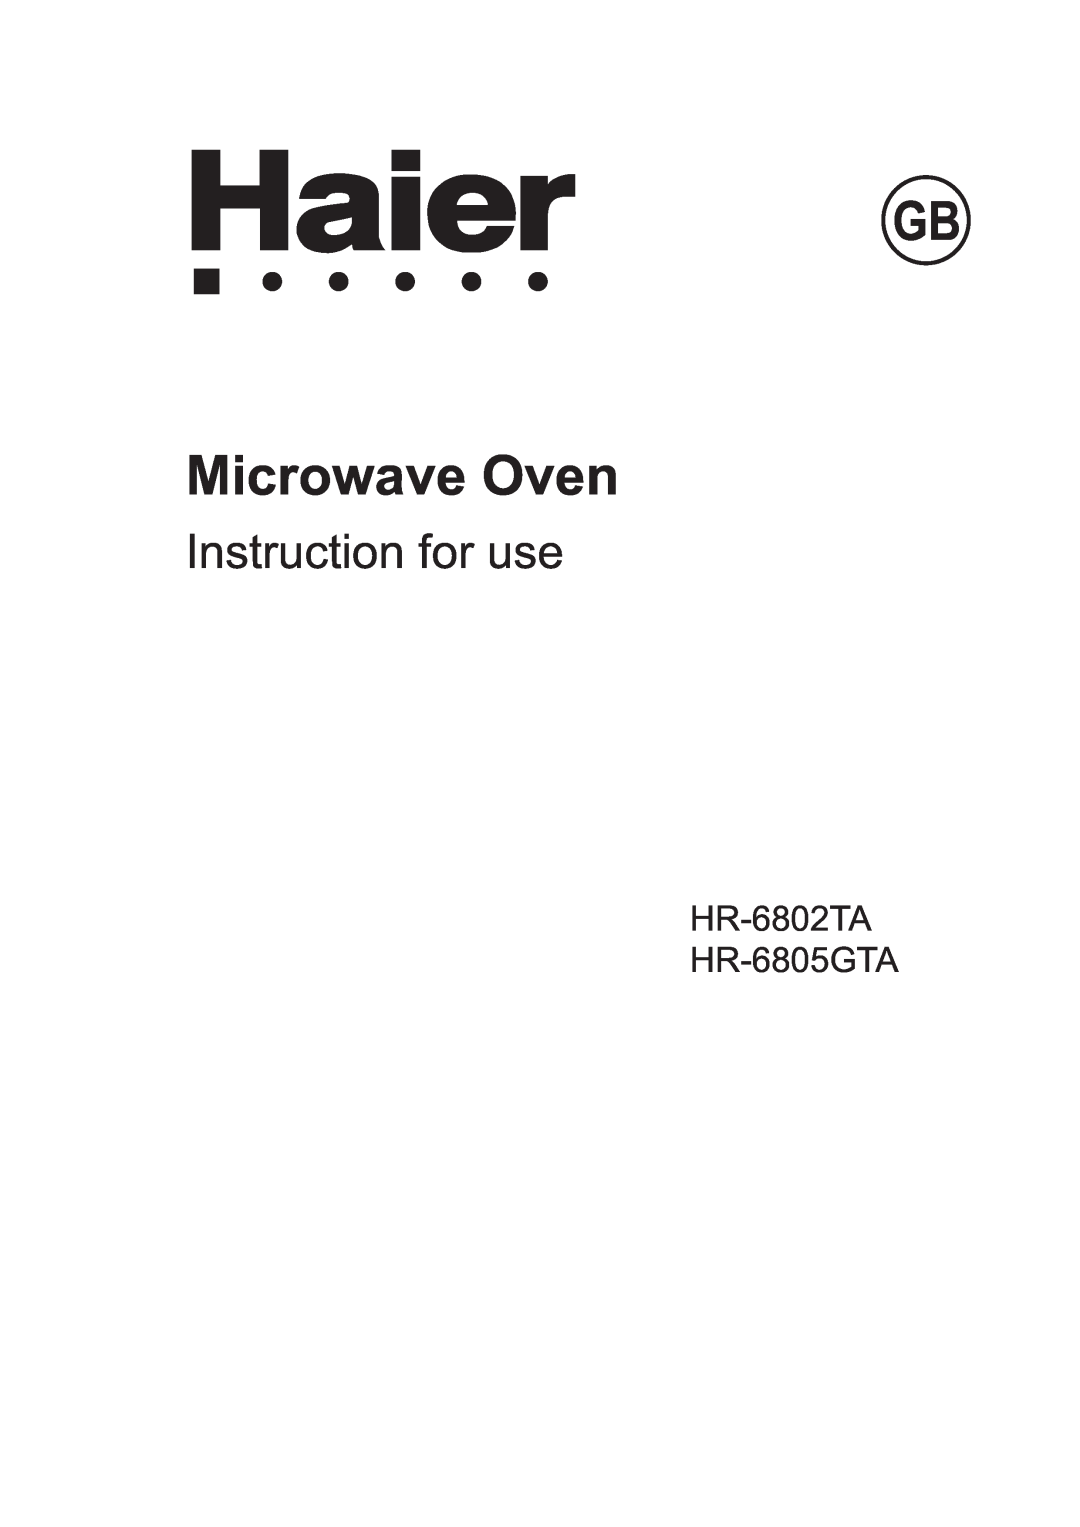 Haier manual GB Microwave Oven, Instruction for use, HR-6802TA HR-6805GTA 